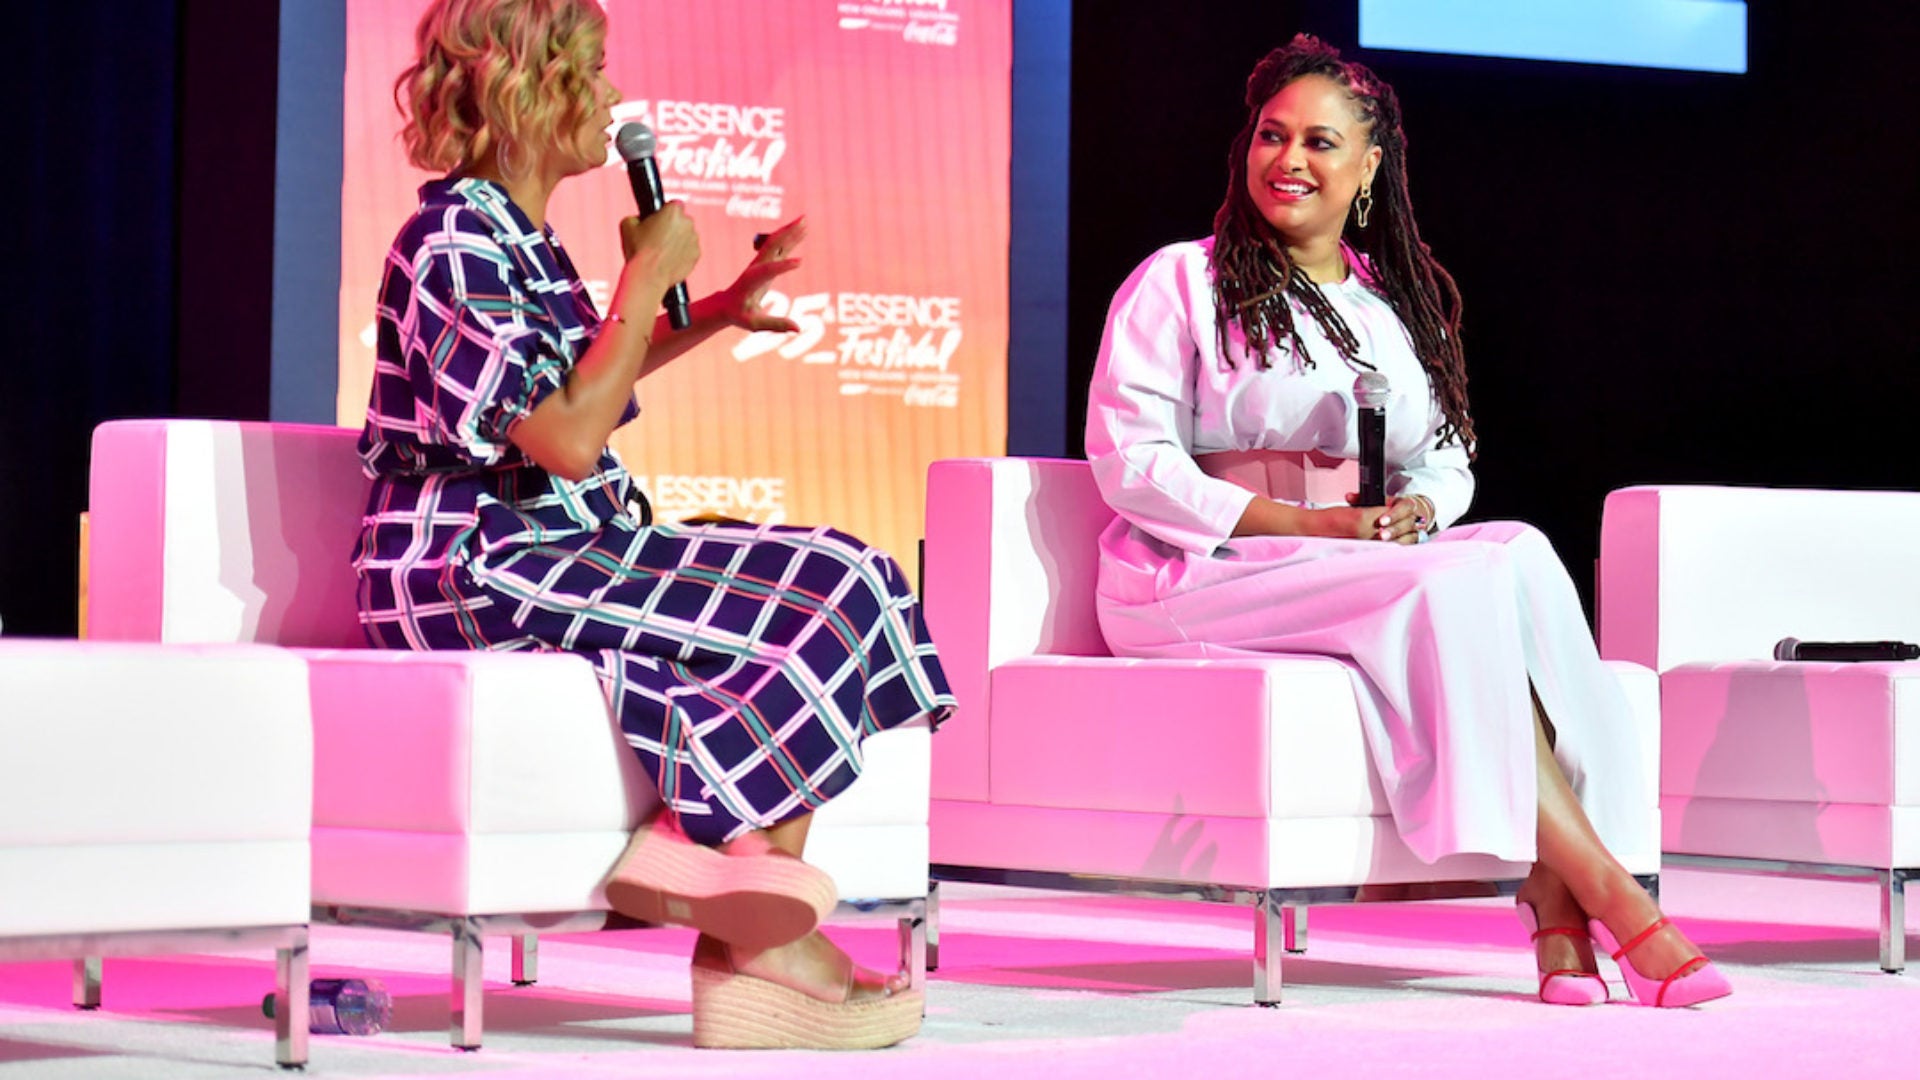 Essence Festival 2019: Ava DuVernay Wants To Change The Fact That '90% Of Entertainment Is Produced By White Men'